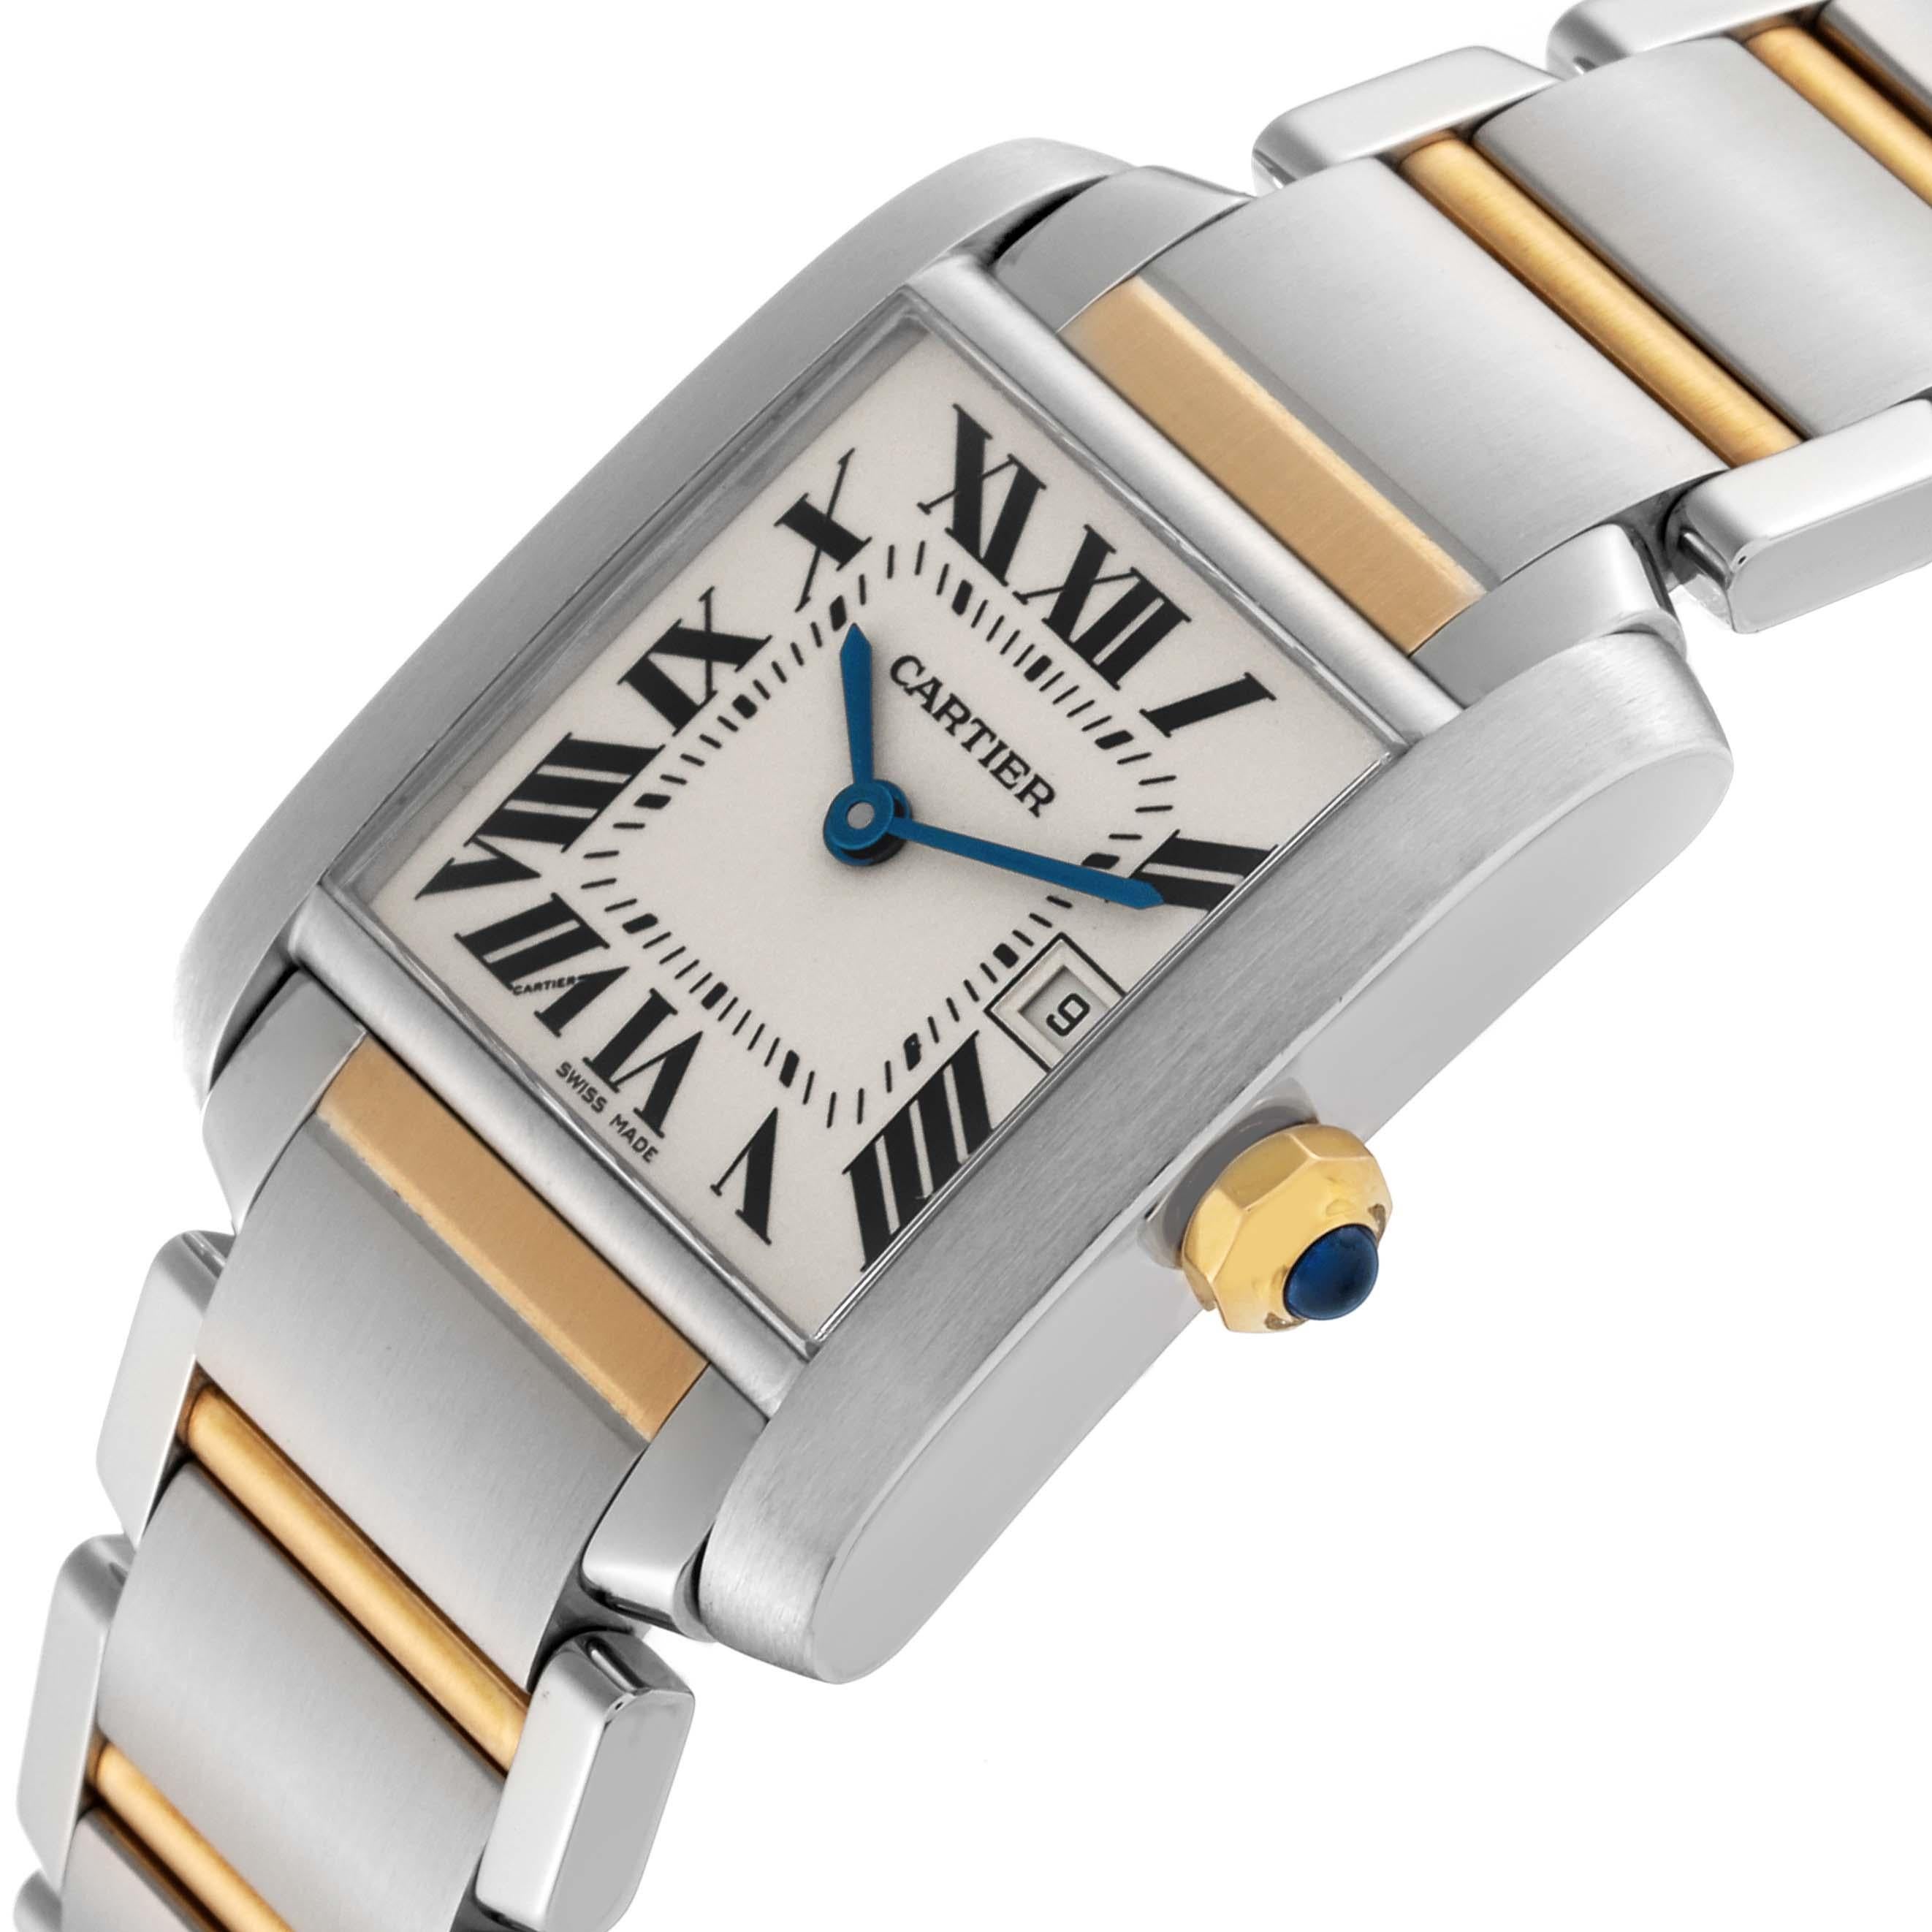 Cartier Tank Francaise Midsize Steel Yellow Gold Ladies Watch W51012Q4 1